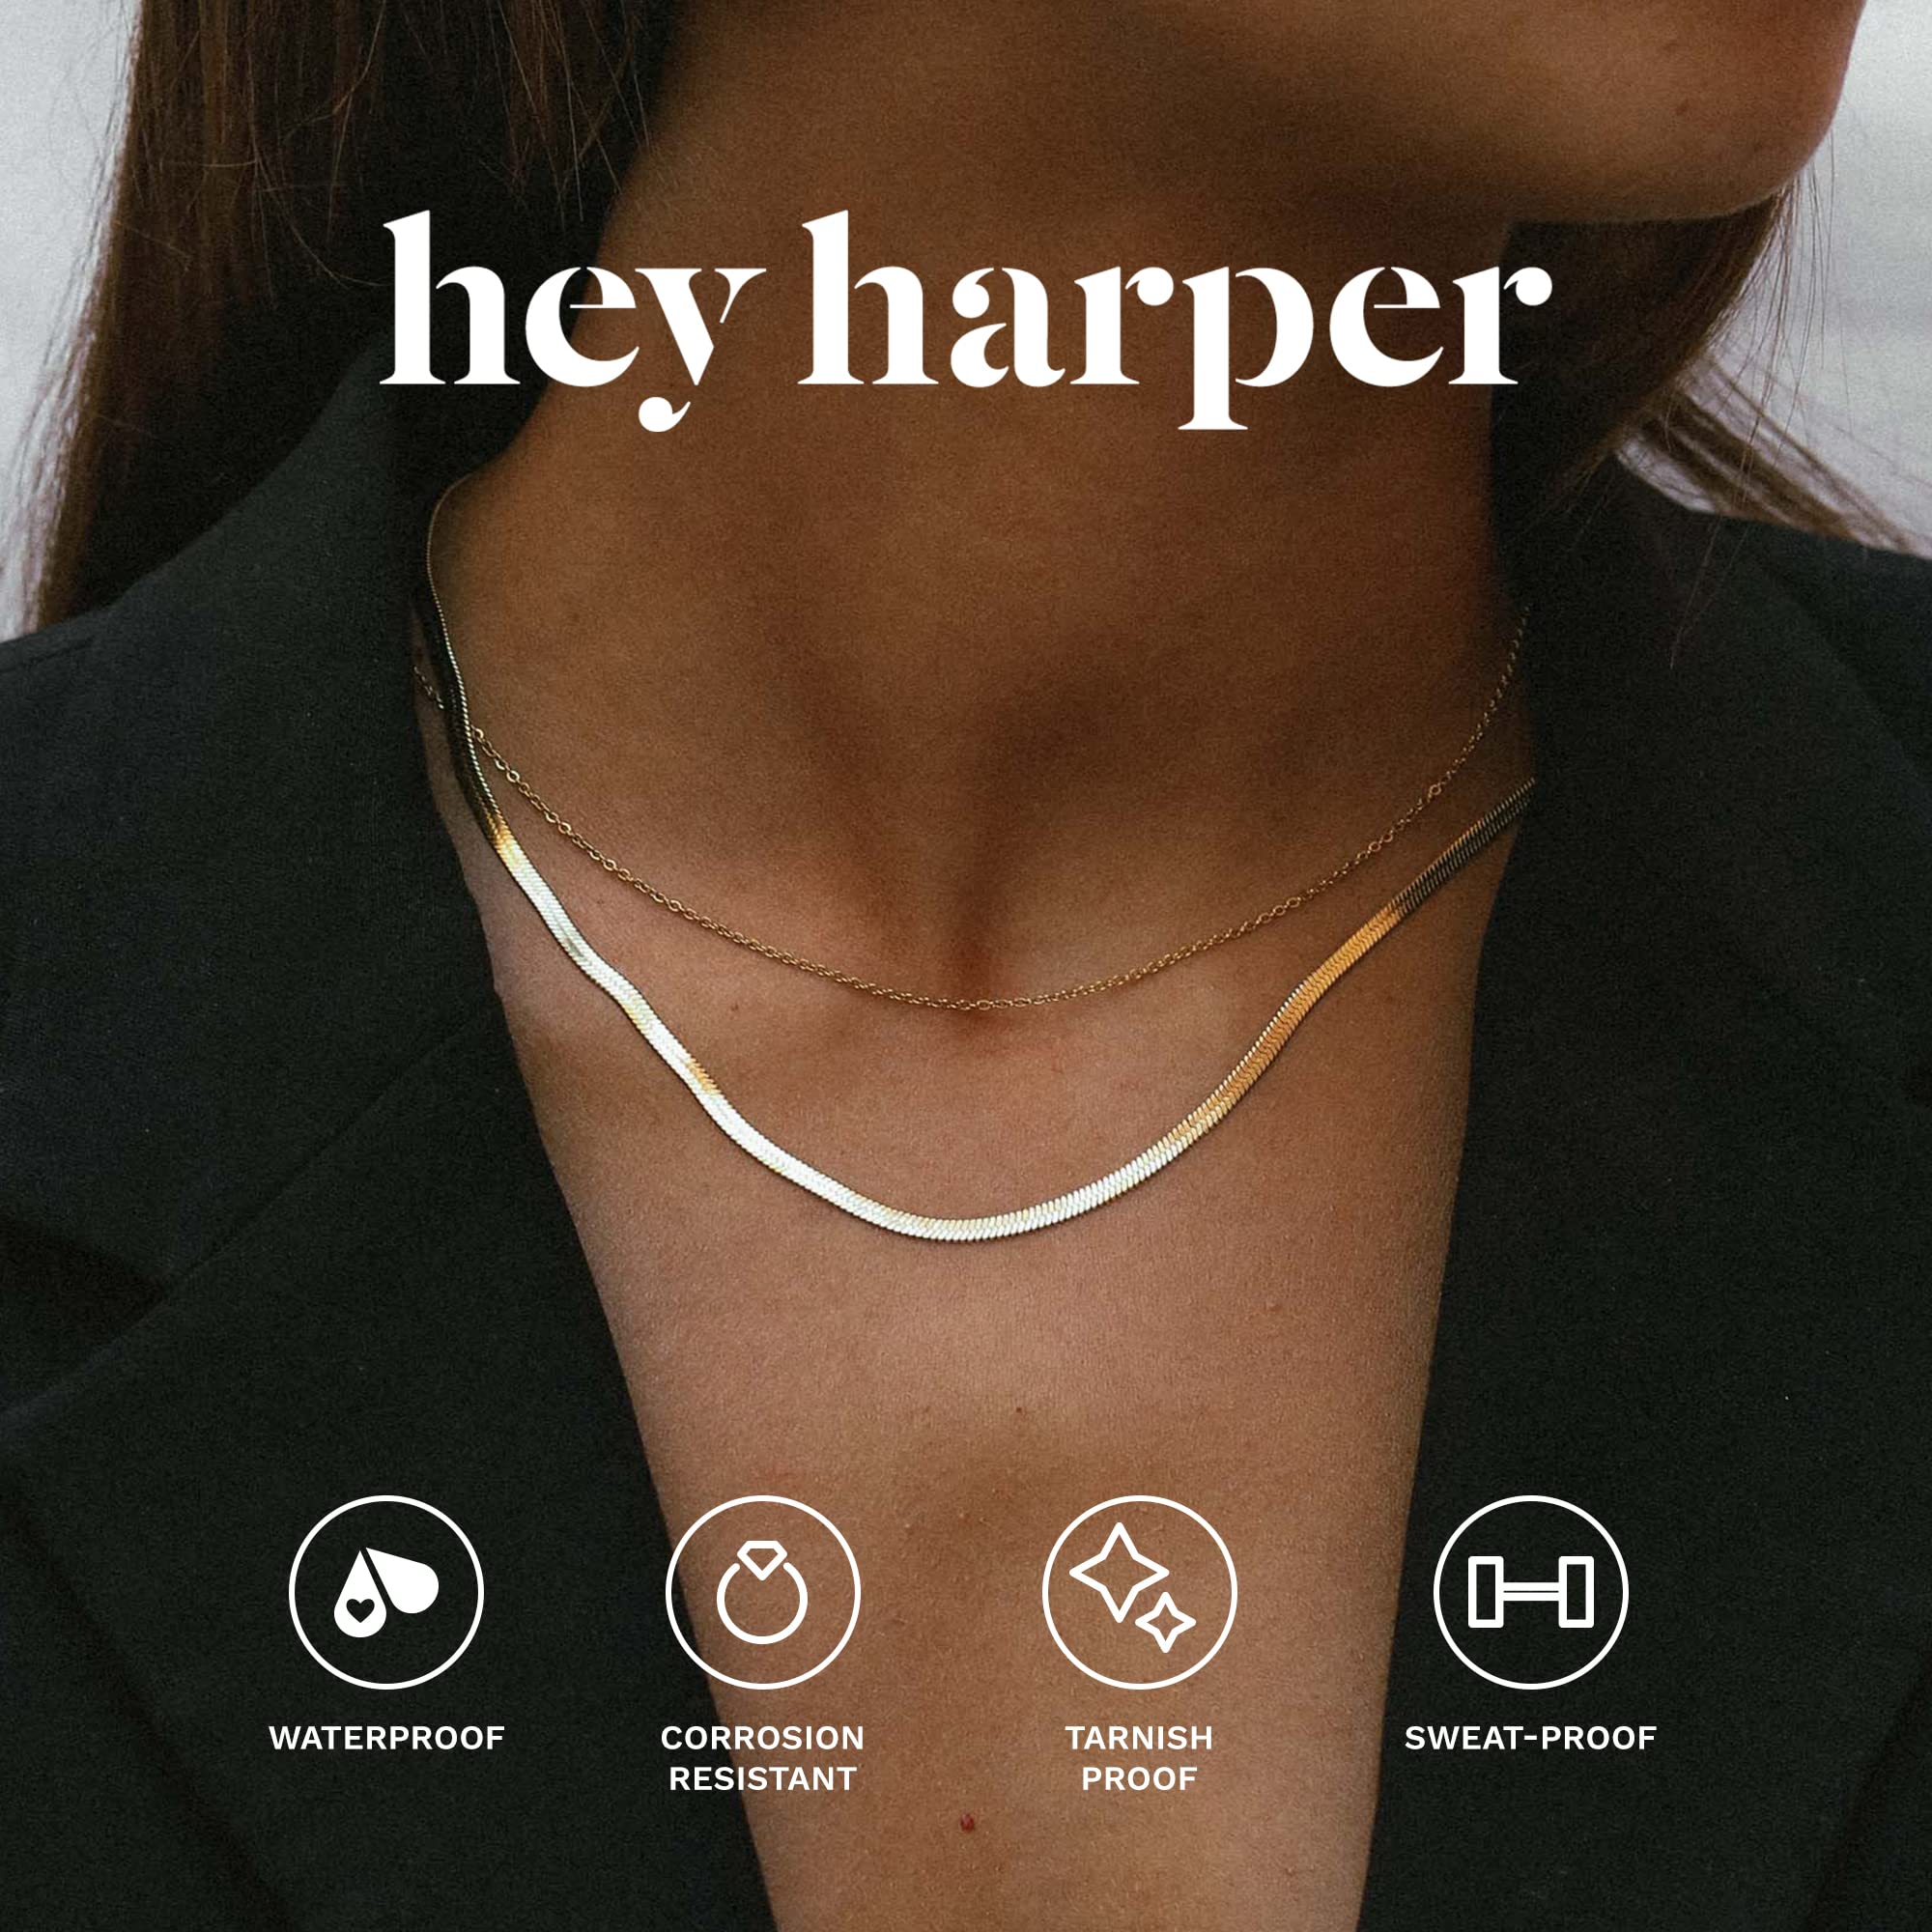 Hey Harper Born Ready Necklace - Waterproof & Sweat-Proof Layered Necklaces for Women - Gold Necklace for Women - Stainless Steel Necklace - Chain Necklace with 14k Golden Color PVD Coating - Aesthetic Herringbone Chain for Women for Everyday Wear